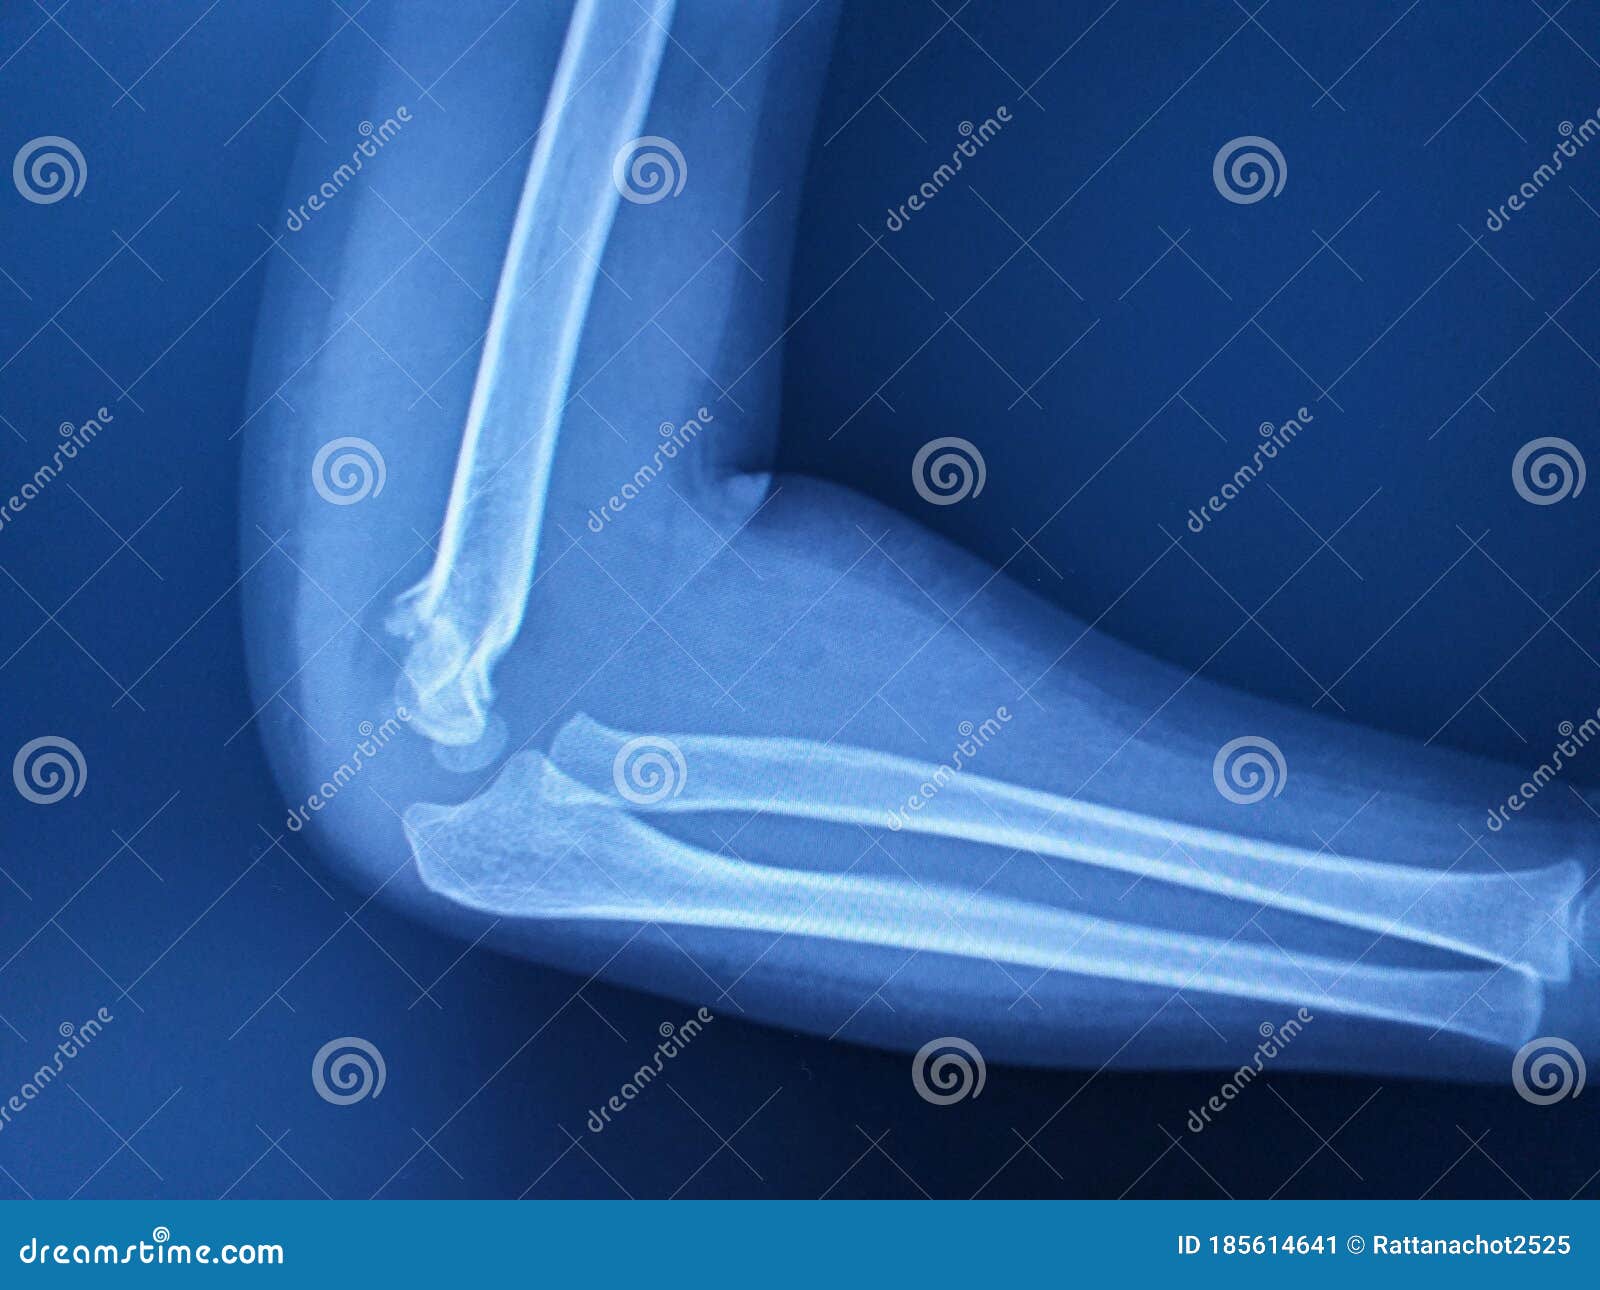 x-ray elbow joint lateral view a female 3 year old finding supracondylar fracture distal humerus with joint effusion.no dislocatio